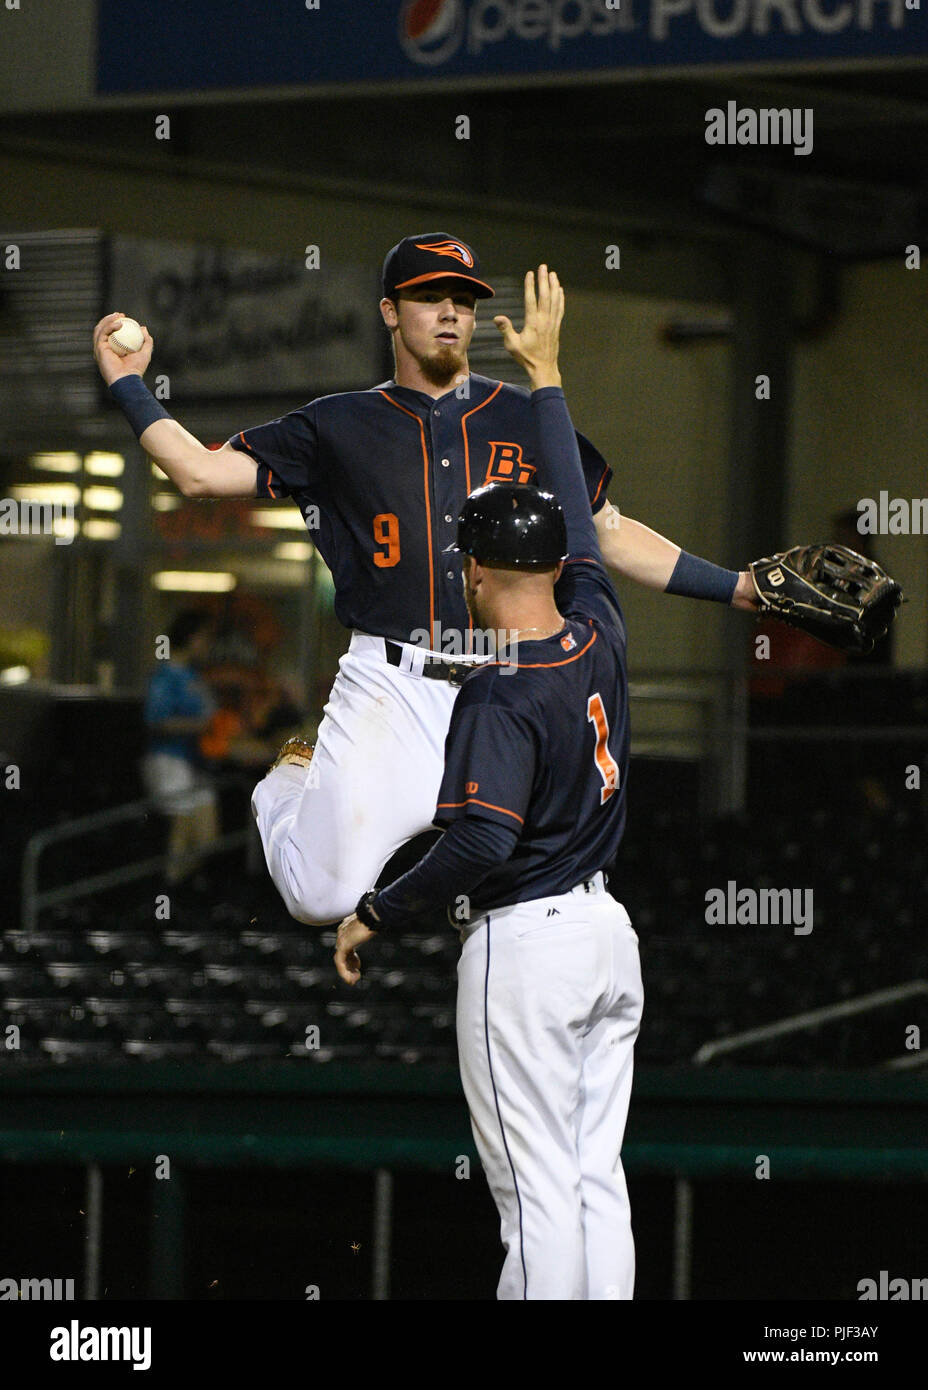 September 6, 2018; Bowling Green KY, USA Bowling Green Hot Rods left fielder Carl Chester (9) gives Bowling Green Hot Rods manager Craig Albernaz (1) a high five during a Mid West League series between the Lansing Lugnuts and the Bowling Green Hot Rods in Bowling Green, KY st Bowling Green Ballpark. Hot Rods sweep Lugnuts and advance t round two. (Mandatory Photo Credit: Steve Roberts/CSM) Stock Photo